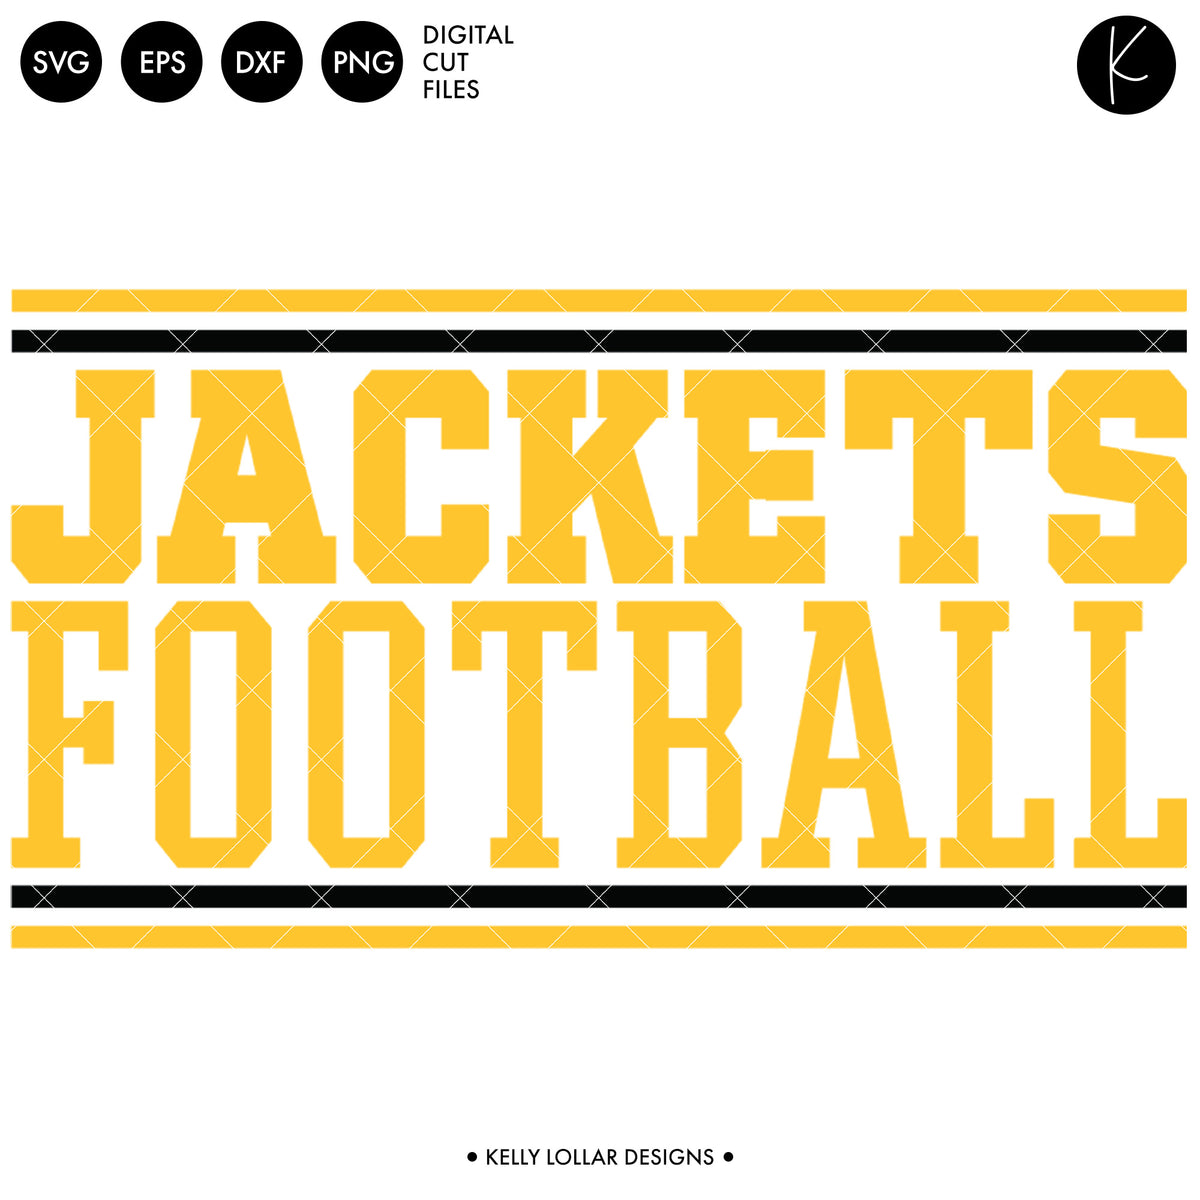 Jackets Soccer and Football Bundle | SVG DXF EPS PNG Cut Files